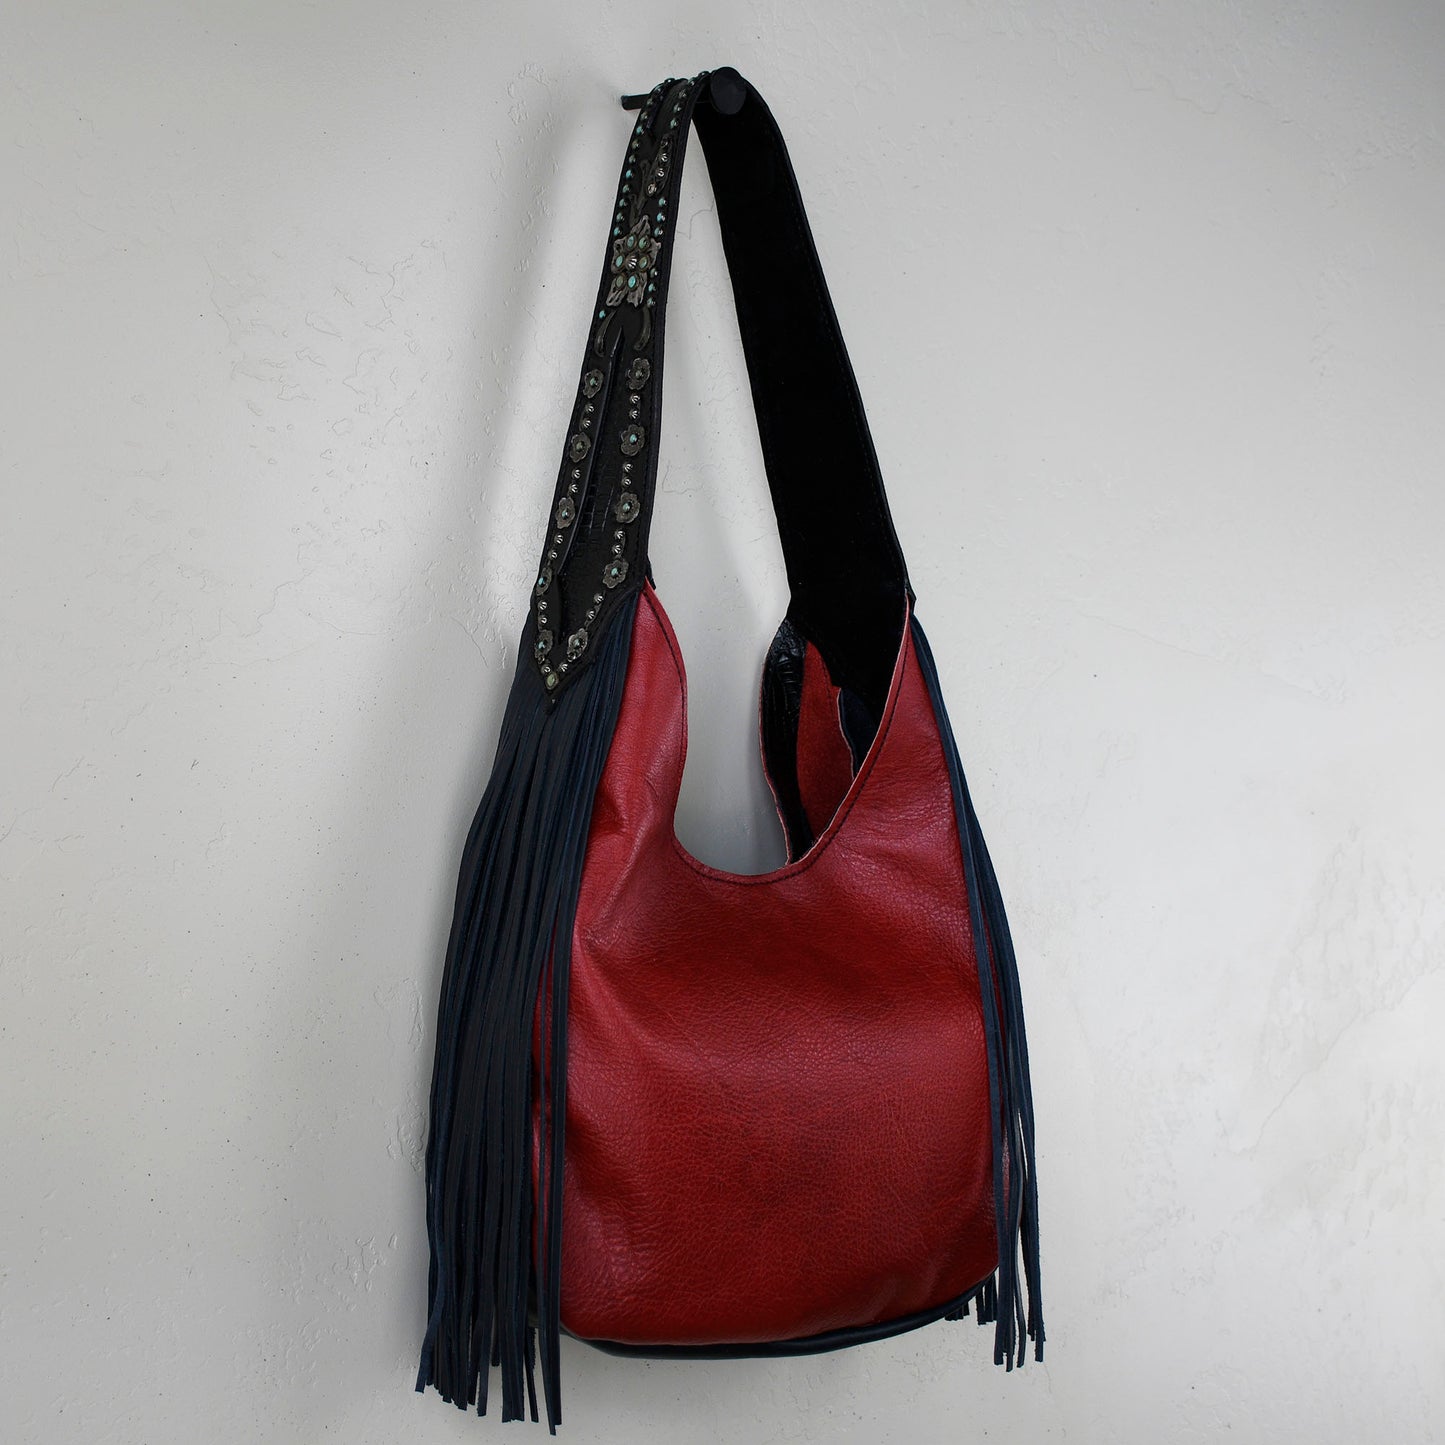 
                  
                    Marilyn bag #15 by Heritage Brand, a red leather shoulder bag with fringe and an embellished strap, hangs on a white wall.
                  
                